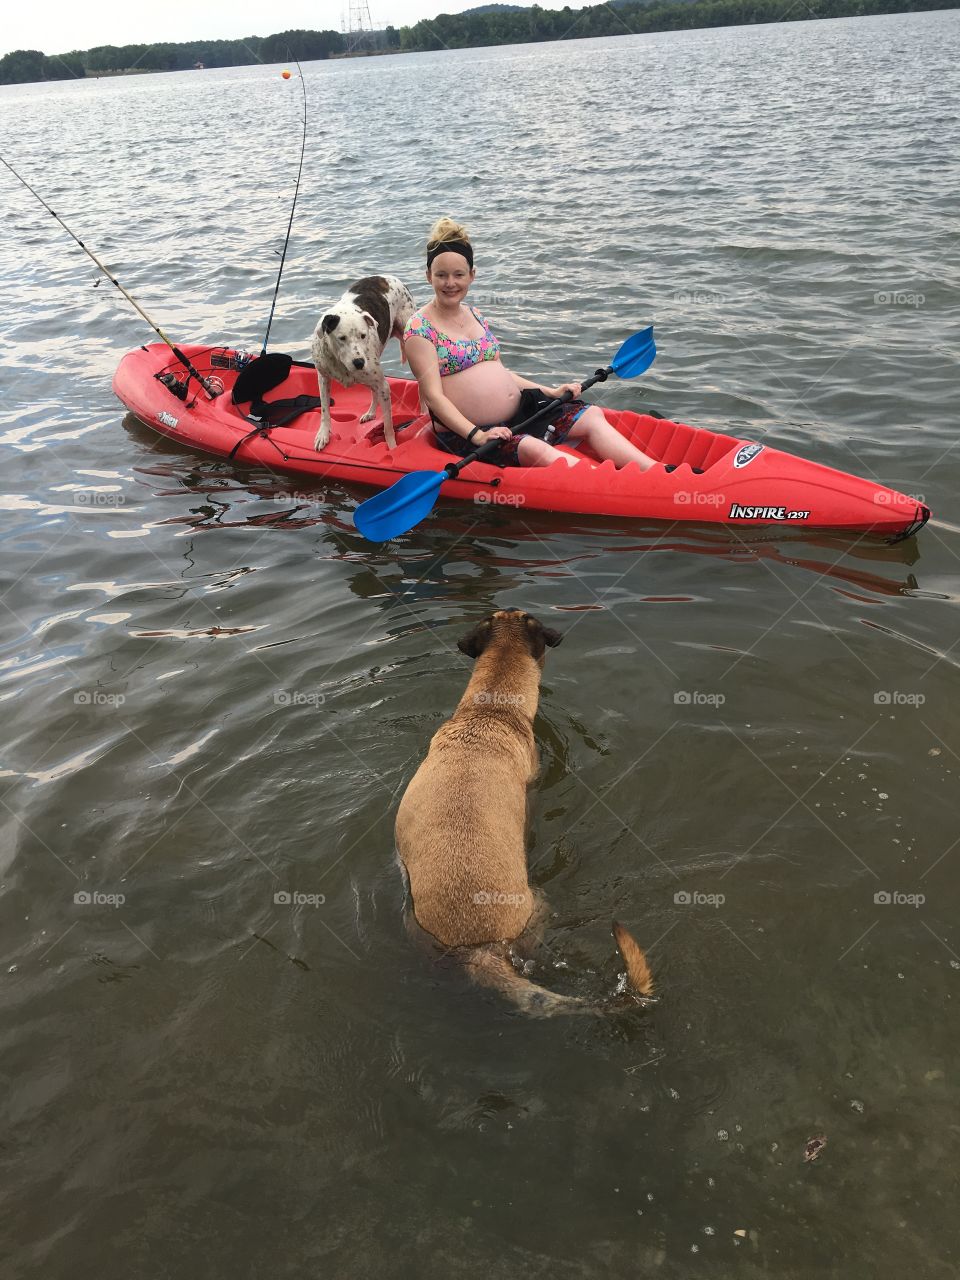 Pregnant woman kayaking with dogs anxious to join her